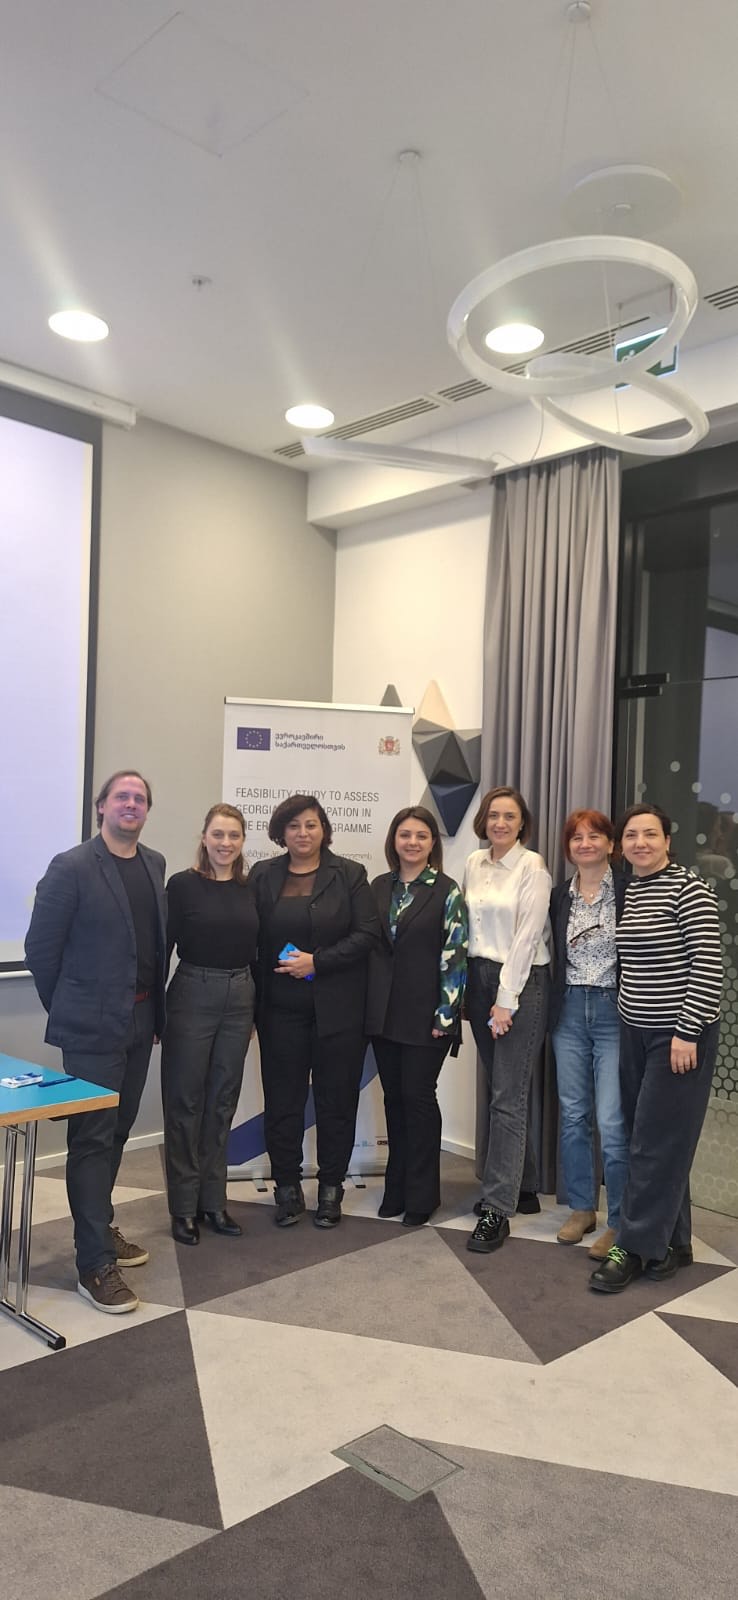 “Feasibility Study to Assess Georgia’s Participation in the Erasmus+ Program”